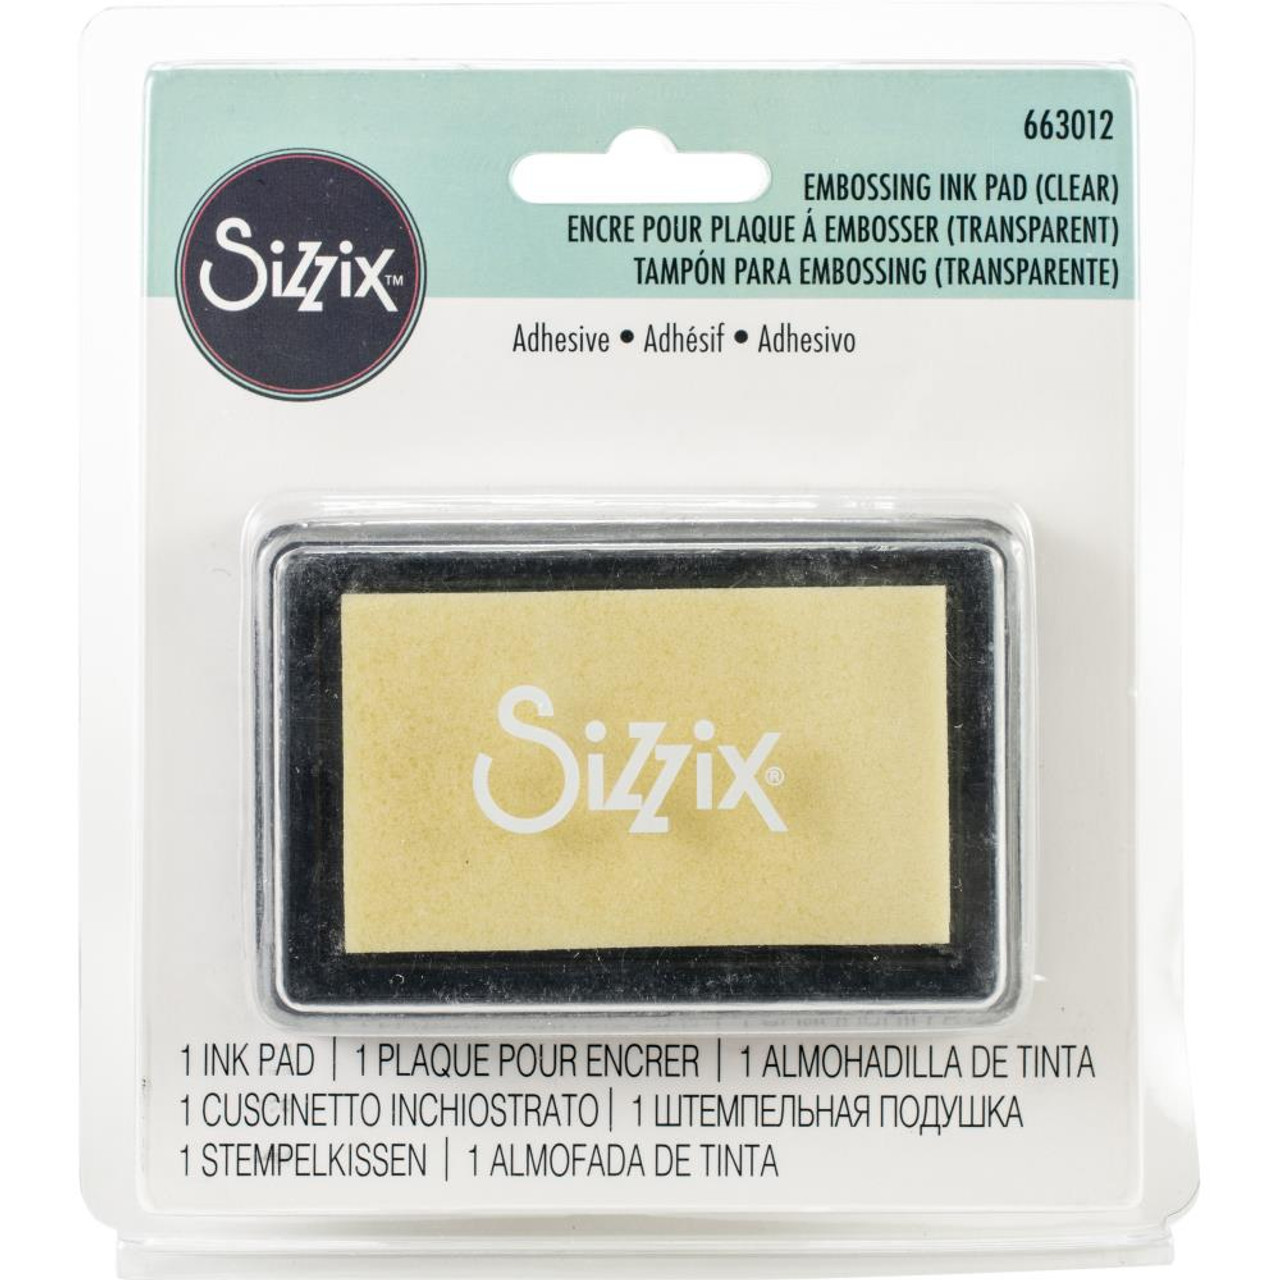 Sizzix Embossing Ink Pad - Clear